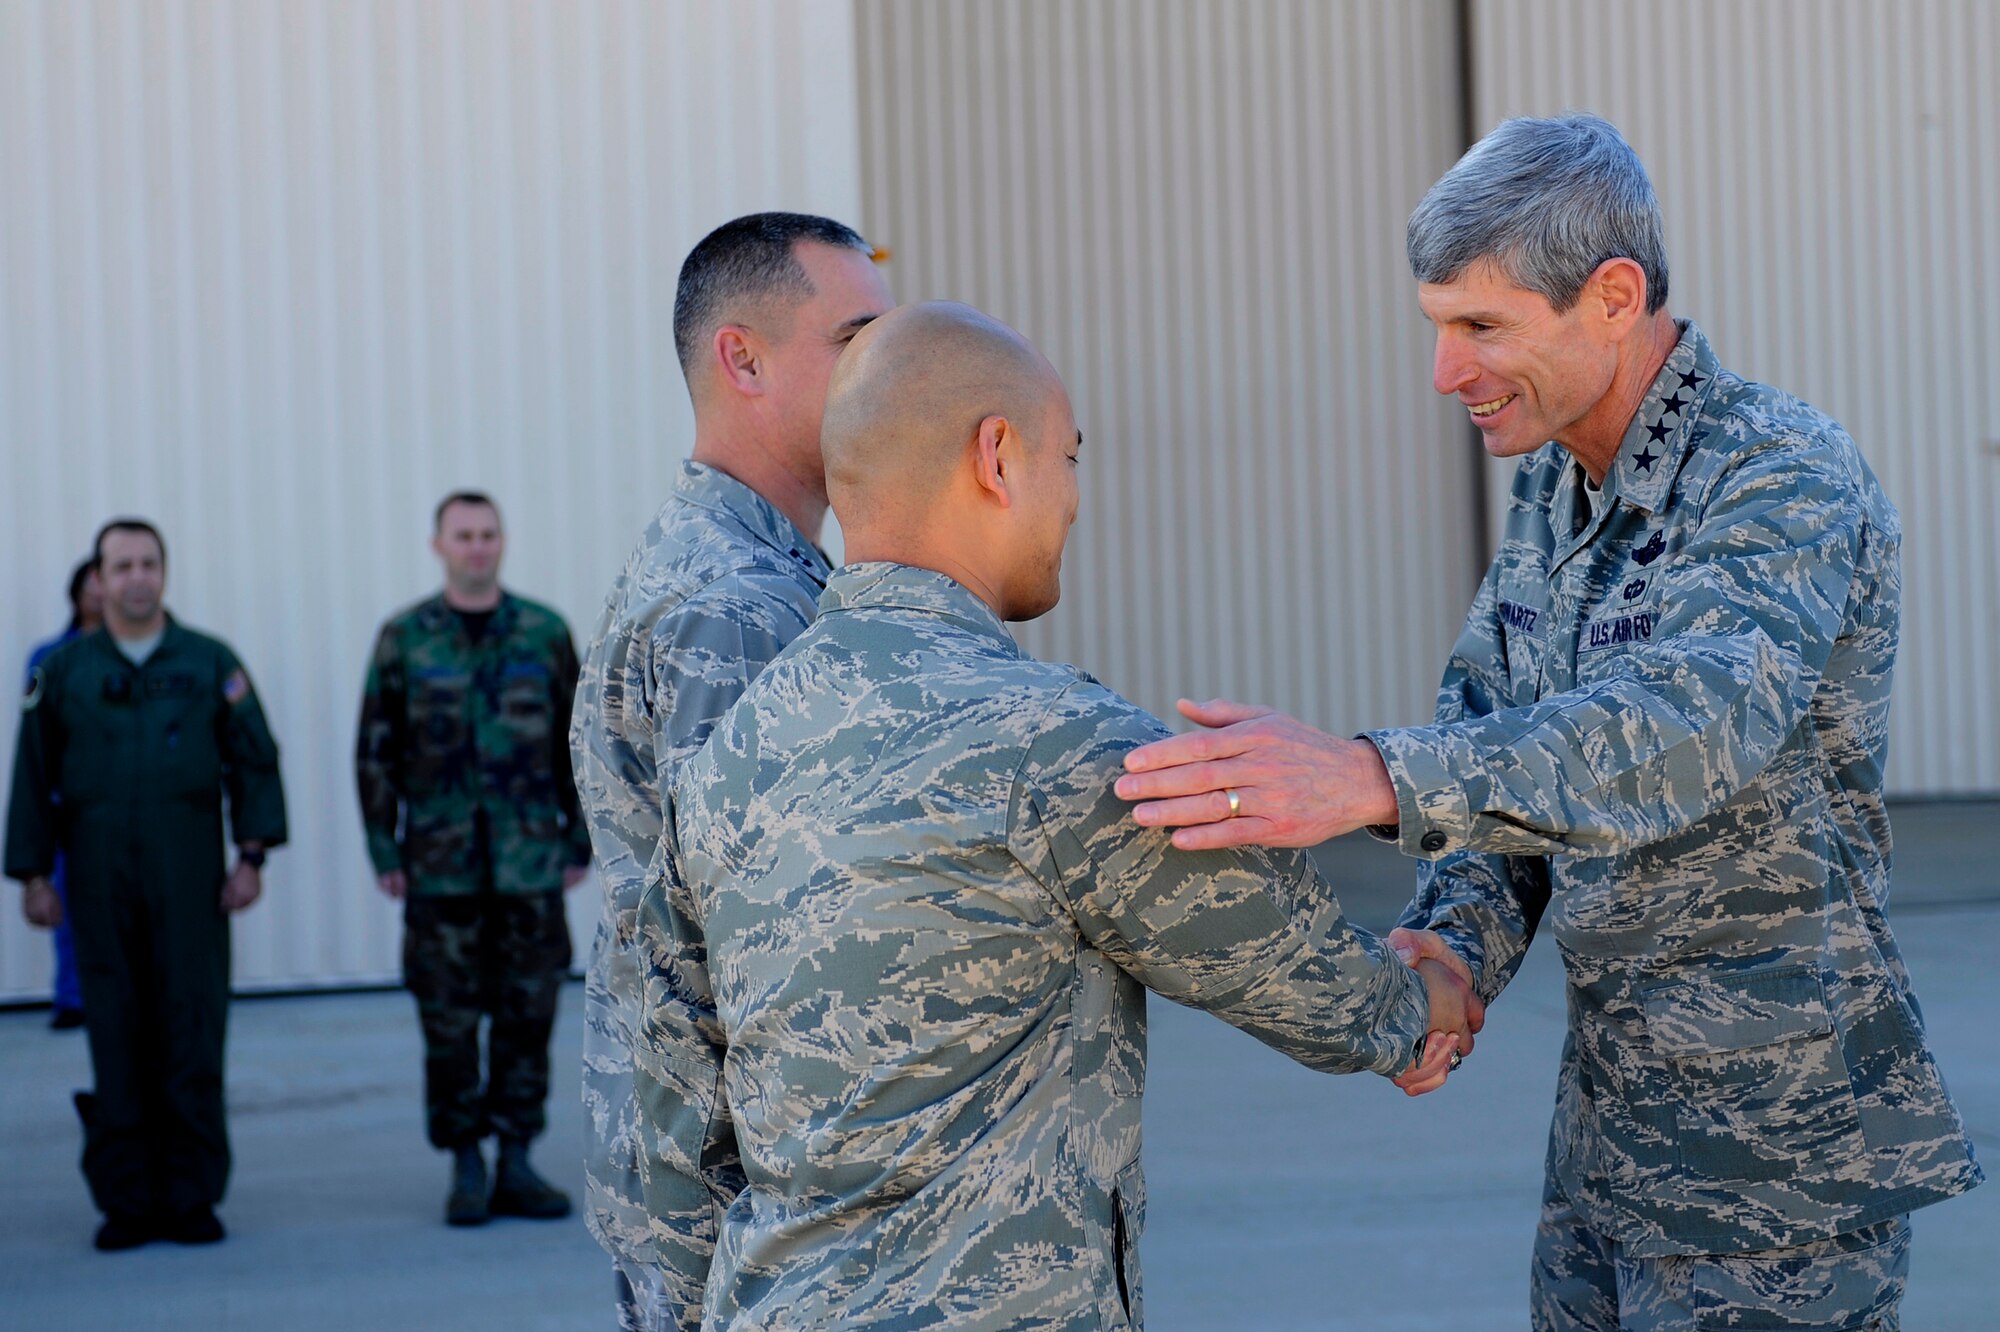 HURLBURT FIELD, Fla. -- Gen. Norton A. Schwartz, Chief of Staff of the U.S. Air Force, Washington, D.C., shakes the hand of Lt. Col Rene Leon, 1st Special Operations Aircraft Maintenance Squadron commander, during a visit here, Jan. 9. The General Schwartz met with Airmen assigned to the 15th Aircraft Maintenance Unit and toured a PC-12 Pilatus. 